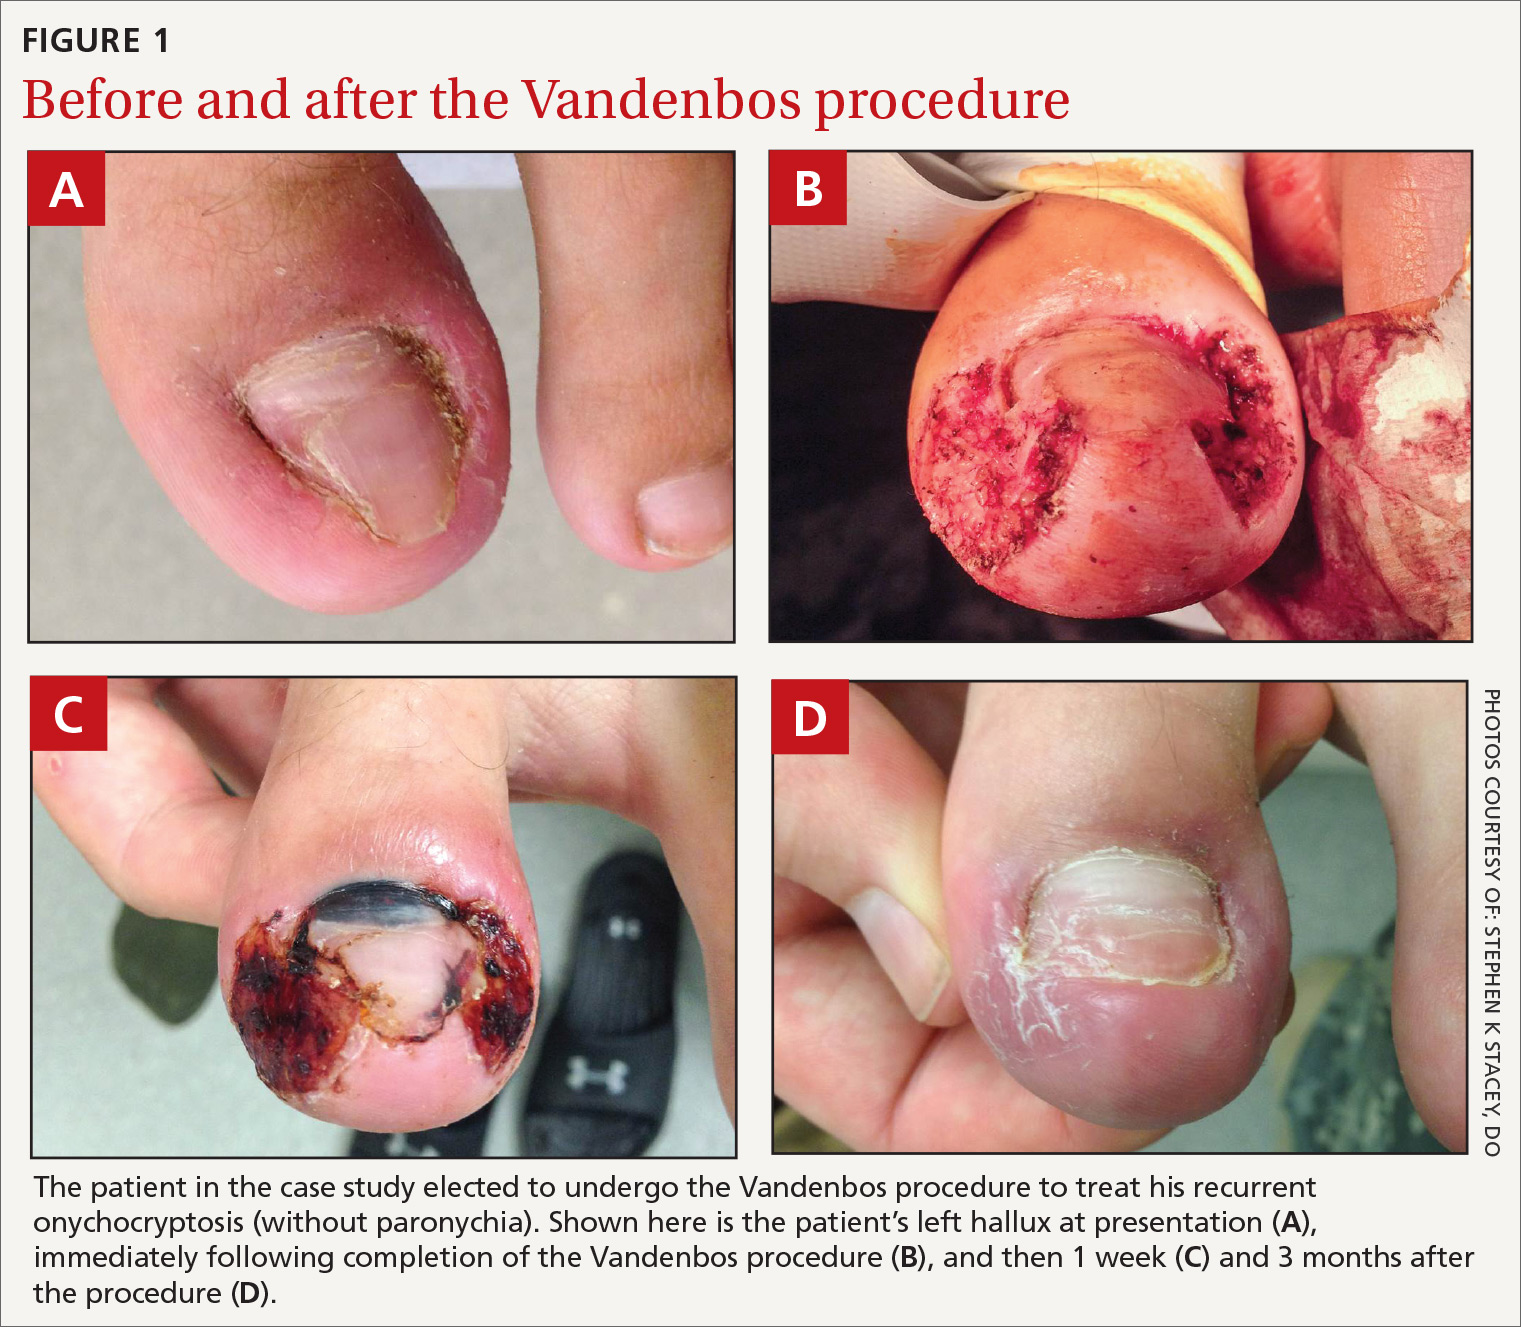 A practical guide to the care of ingrown toenails | MDedge Family Medicine